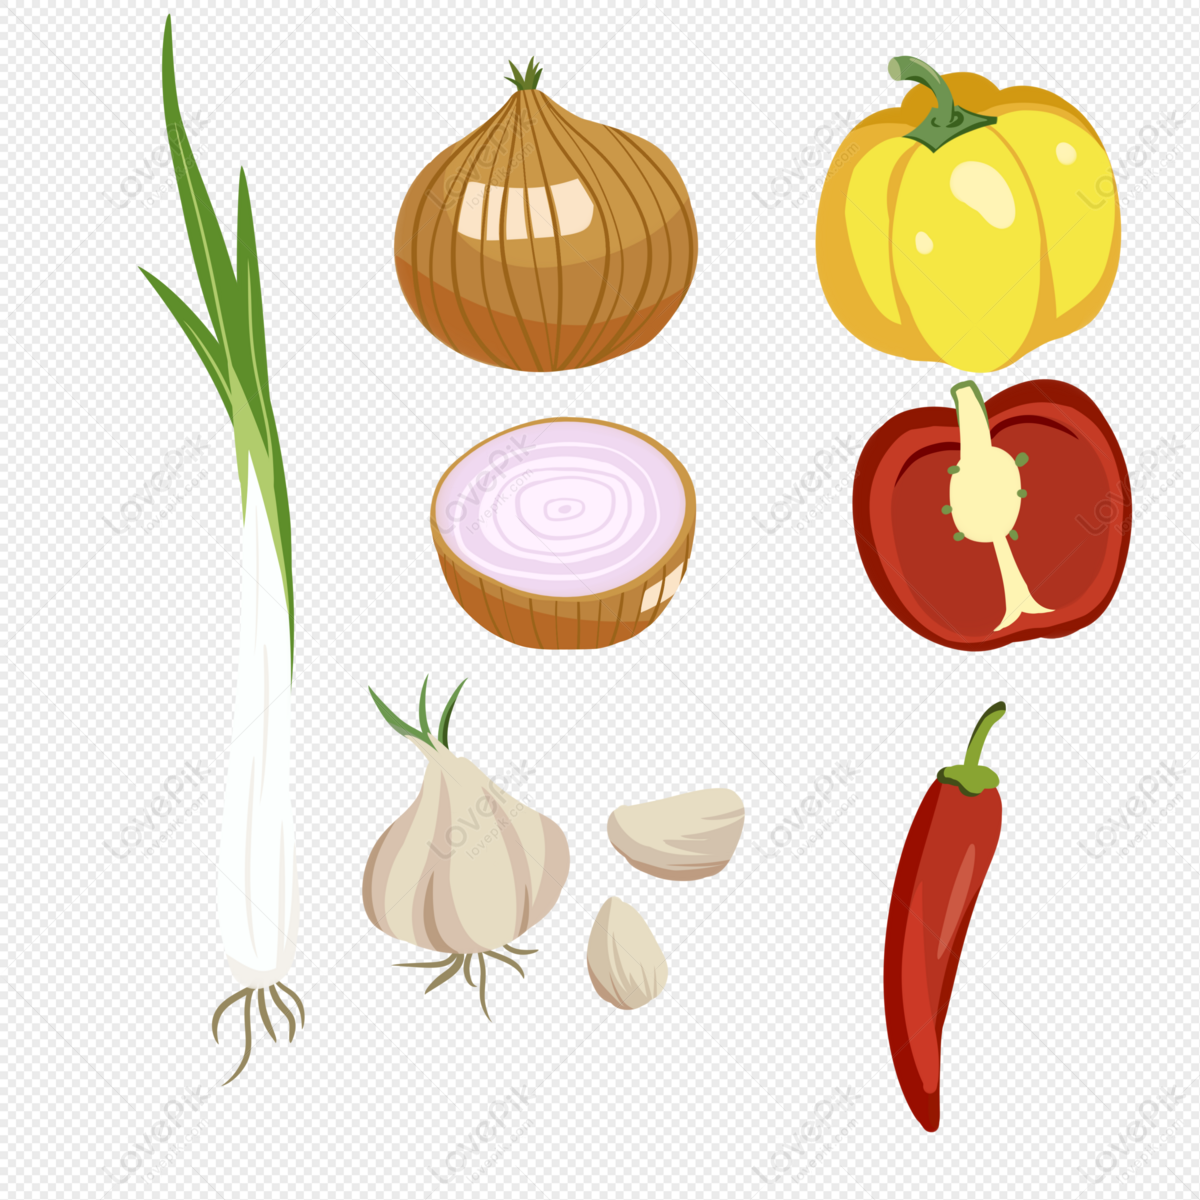 drawing-ingredients-images-hd-pictures-for-free-vectors-download